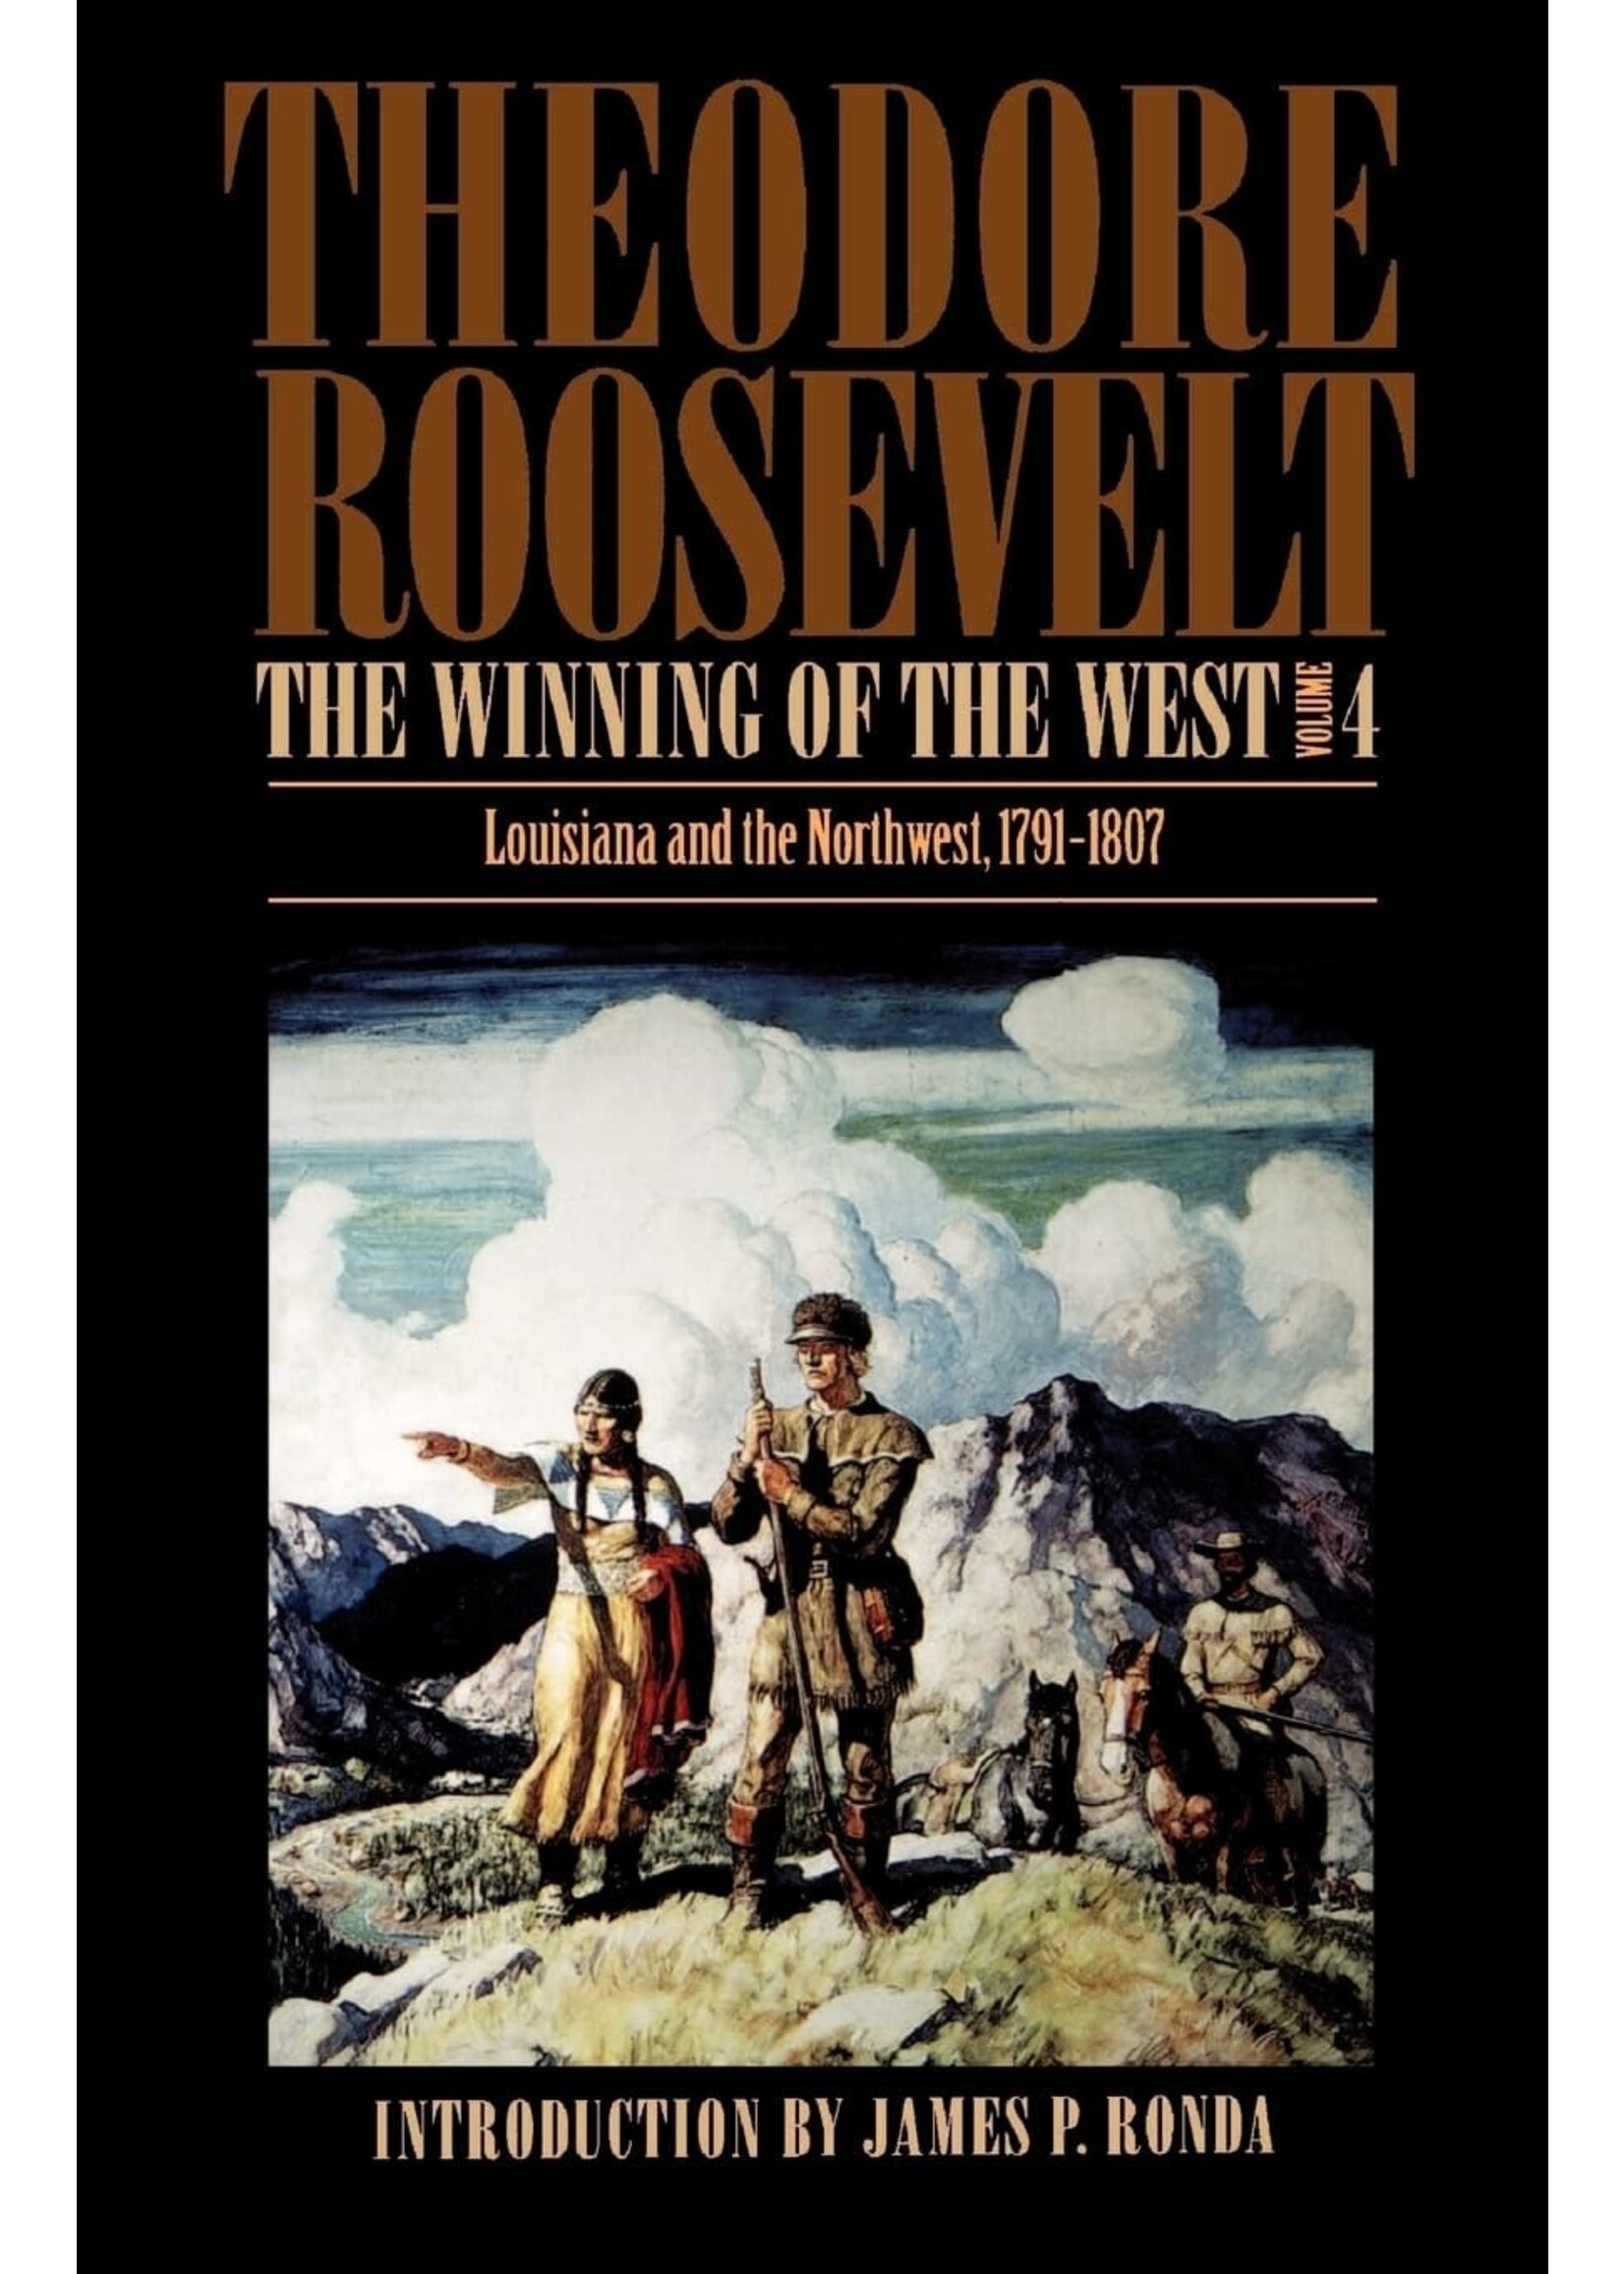 The Winning Of the West, Volume 4: Louisiana and the Northwest, 1791-1807